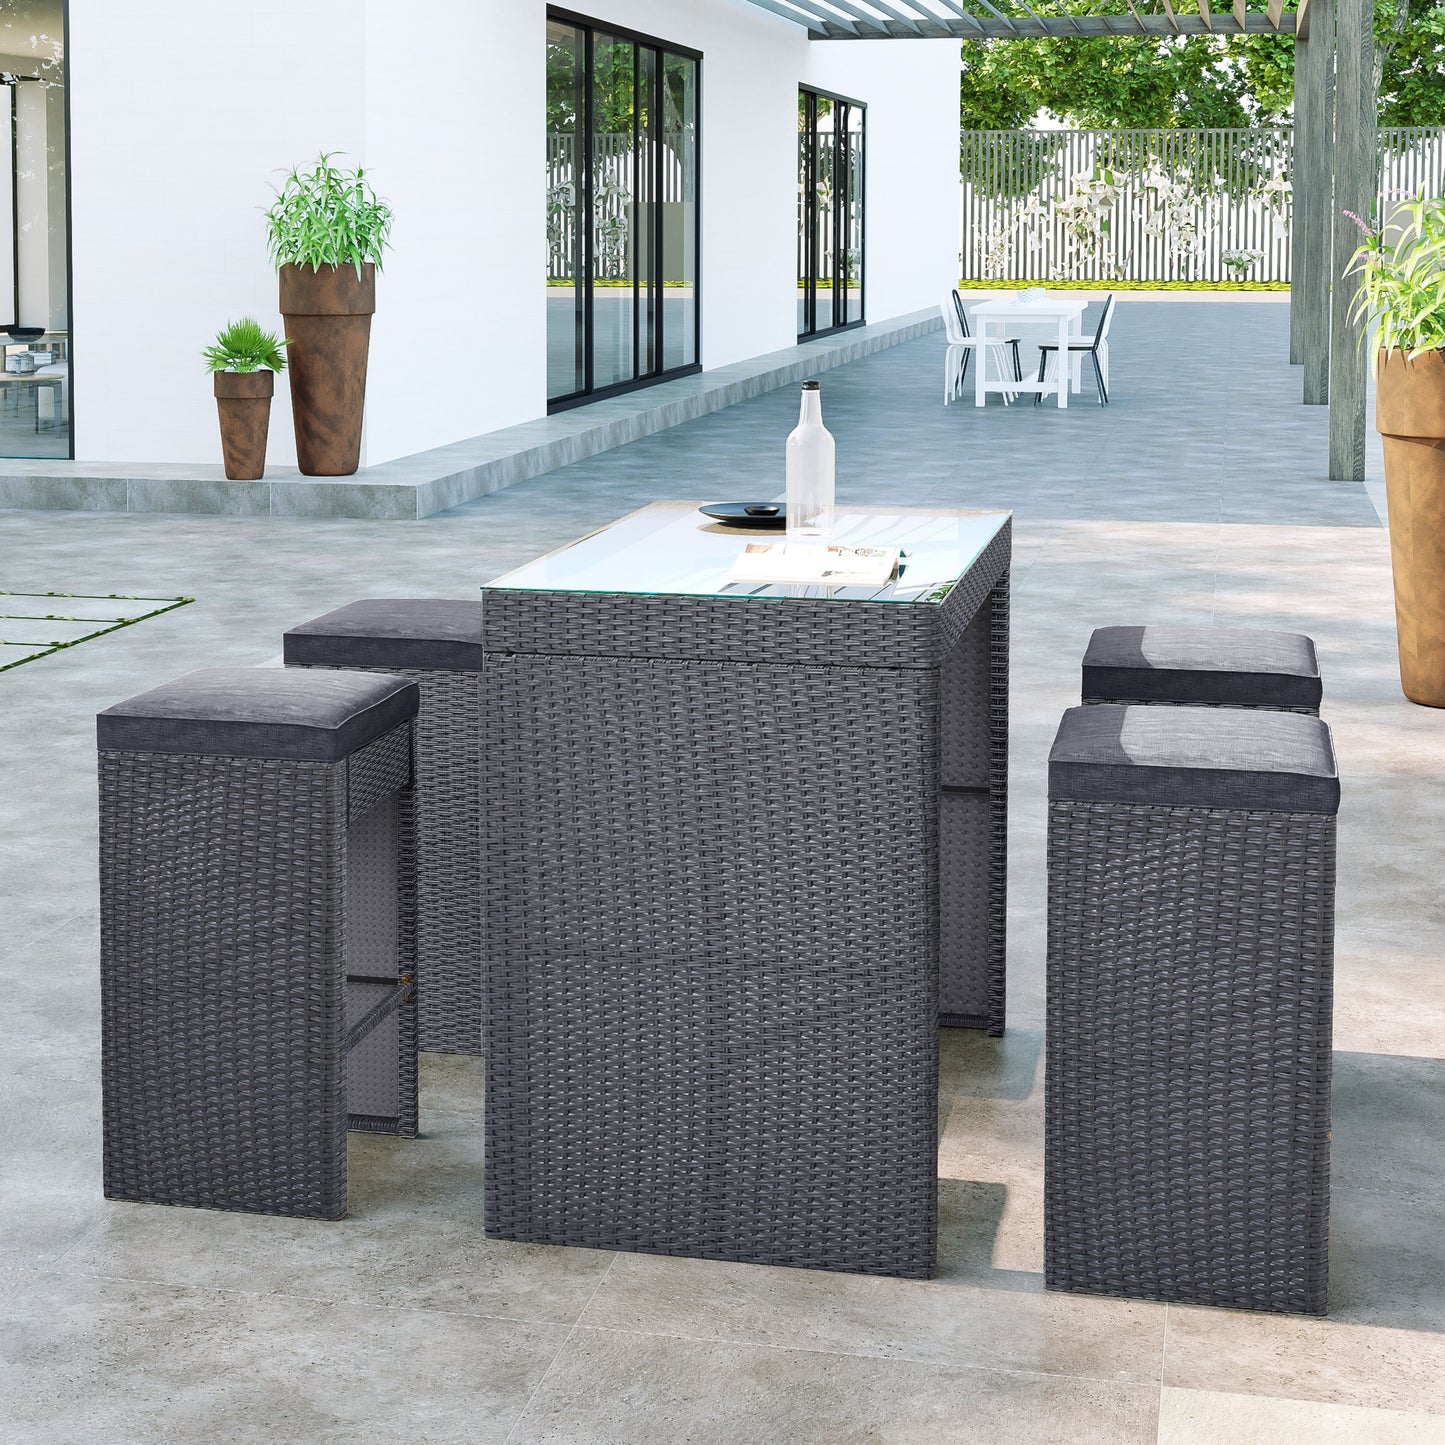 SYNGAR 5 Piece Outdoor Wicker Bar Table Set, Patio All Weather PE Rattan Dining Table Set with 4 Cushioned Stools, Bar Height Pub Table of Storage & Stools Set for 4, for Yard, Balcony, Garden, Y017